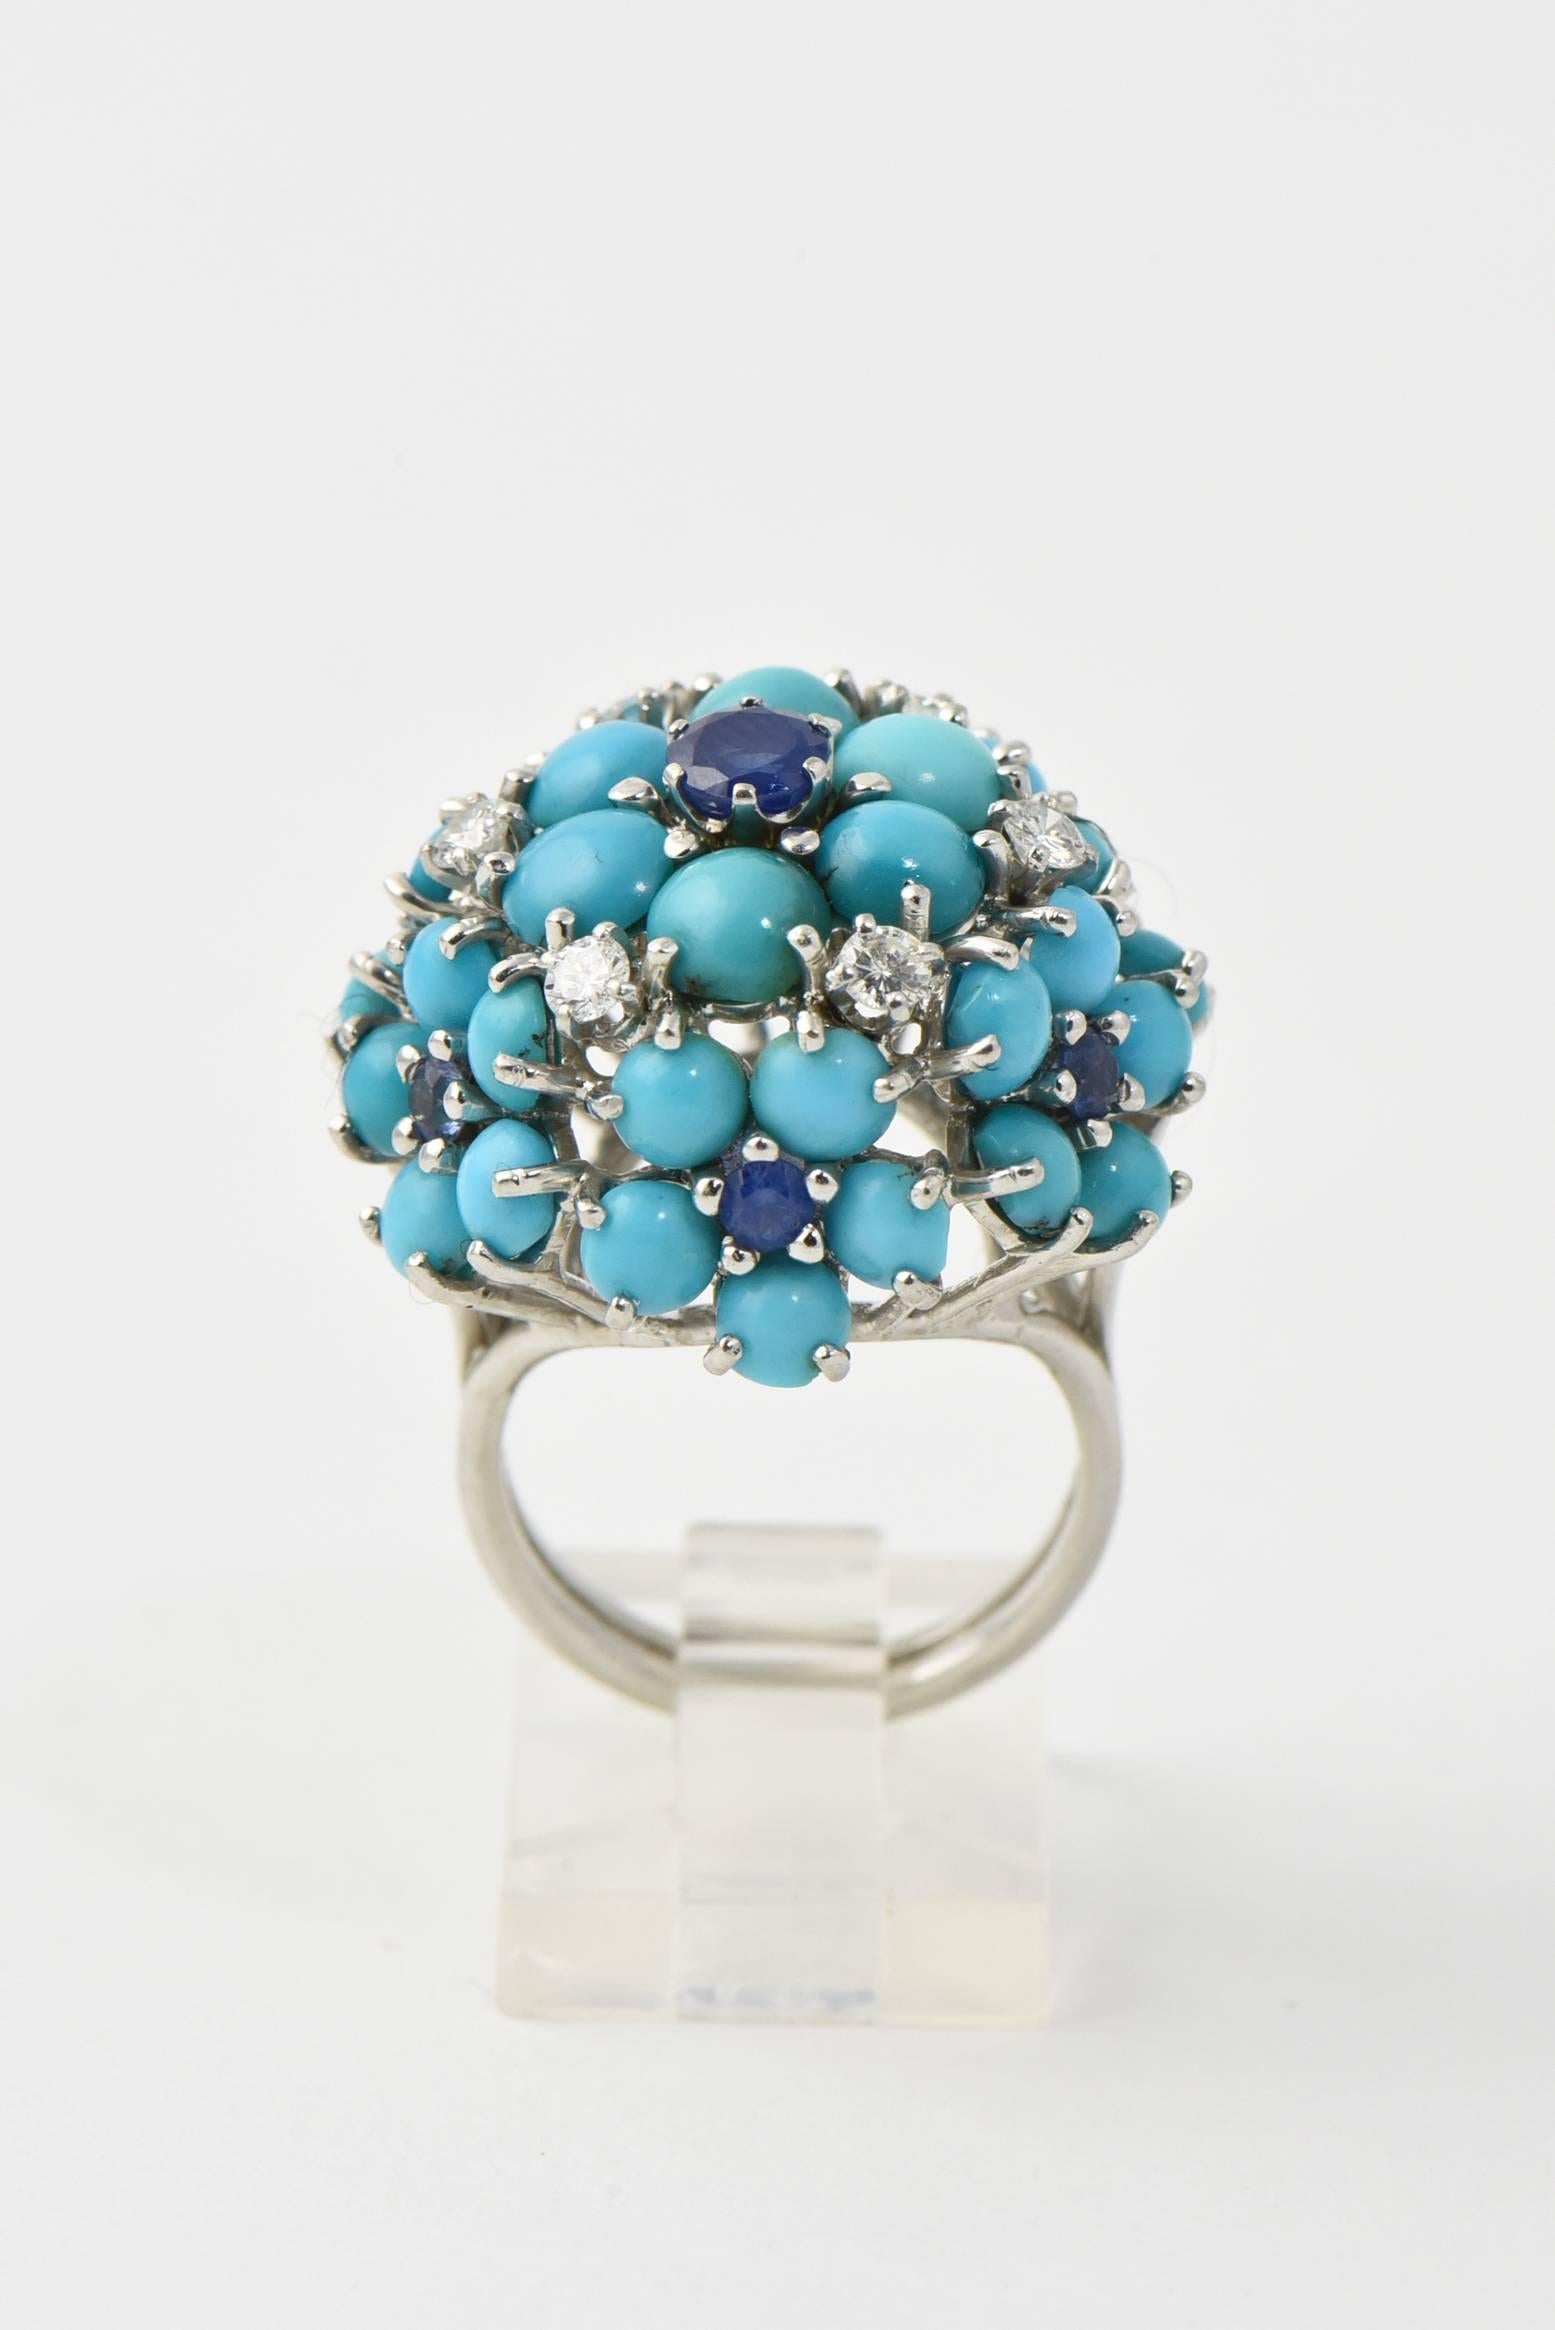 Turquoise flowers with sapphire centers and six interspersed prong set diamonds.  There is a larger flower in the center and six more flowers around the sides.  The ring is made of 14k white gold.

US size 6.5 - it can be sized.